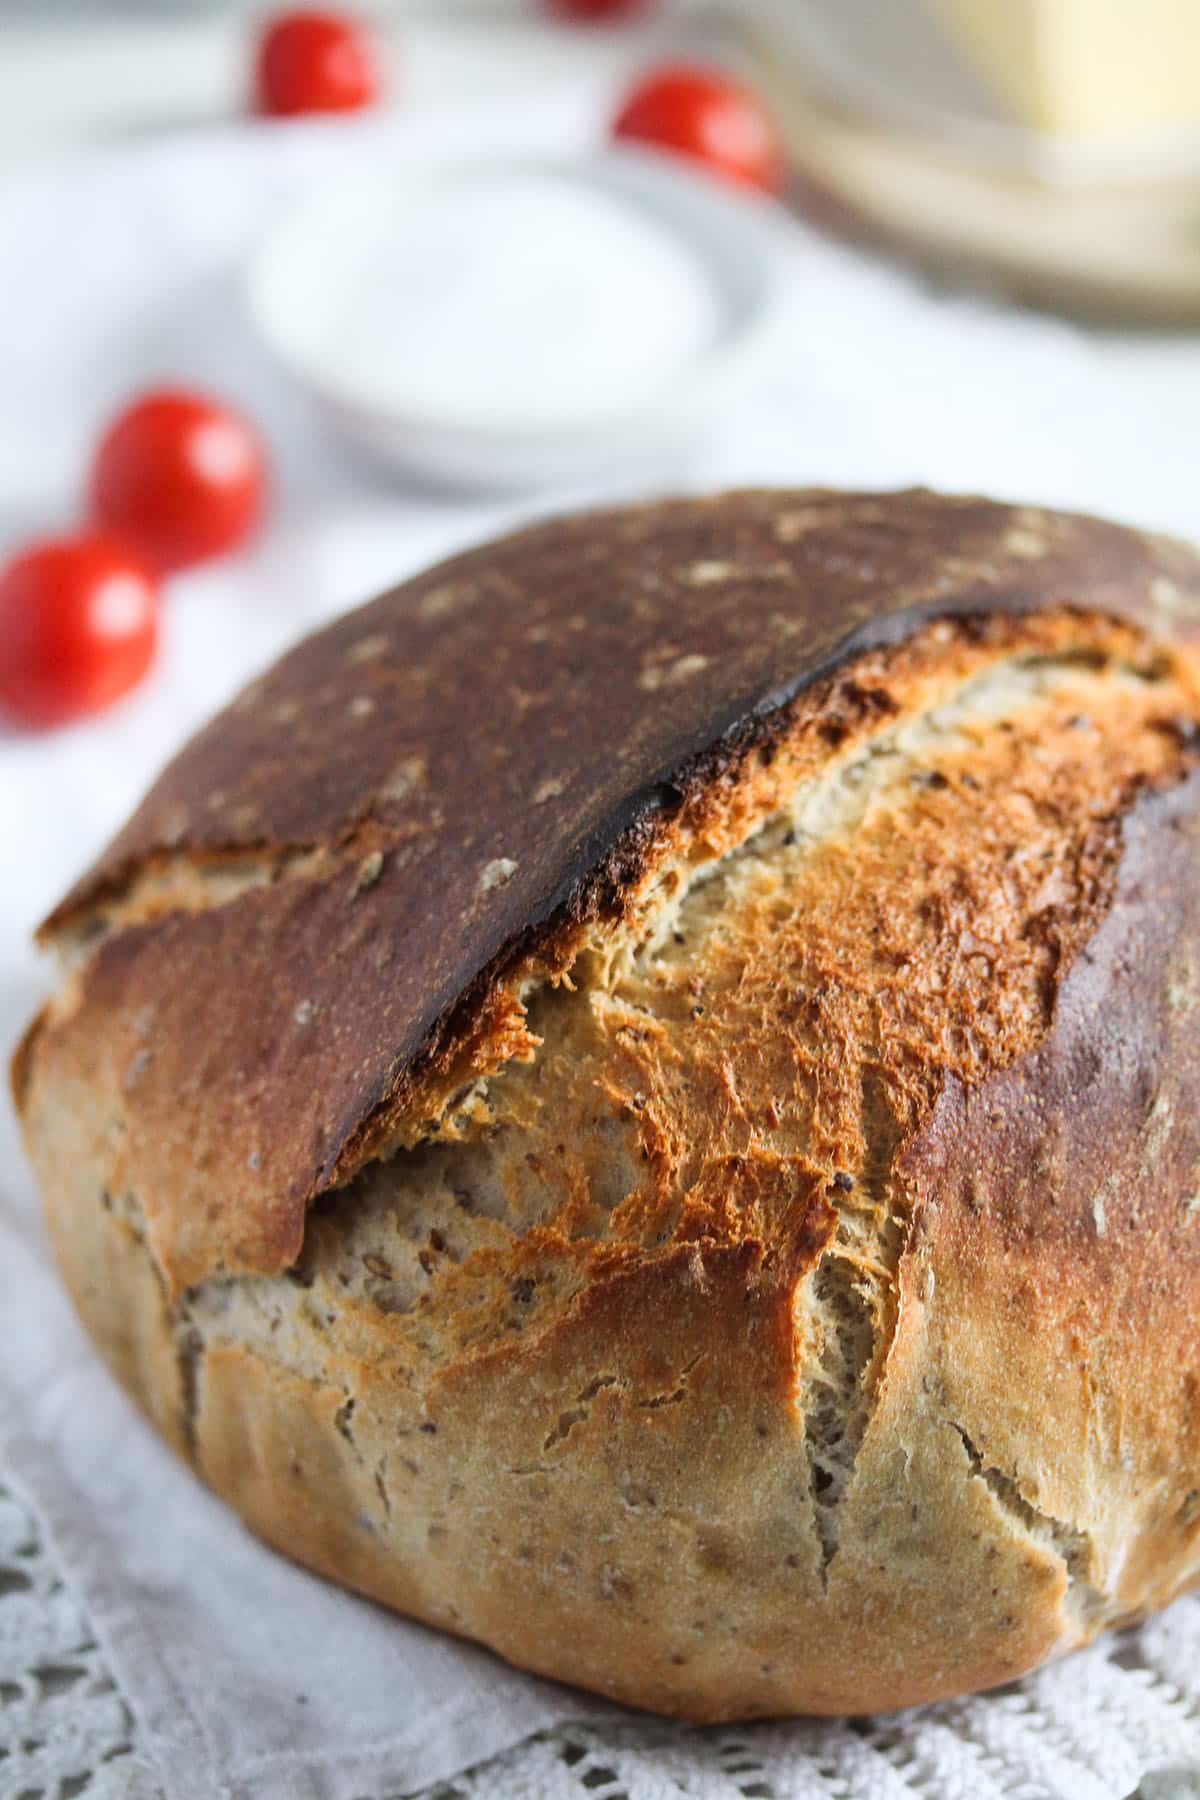 round, crusty and brown bread with some cherry tomatoes and a bowl of salt behind it.